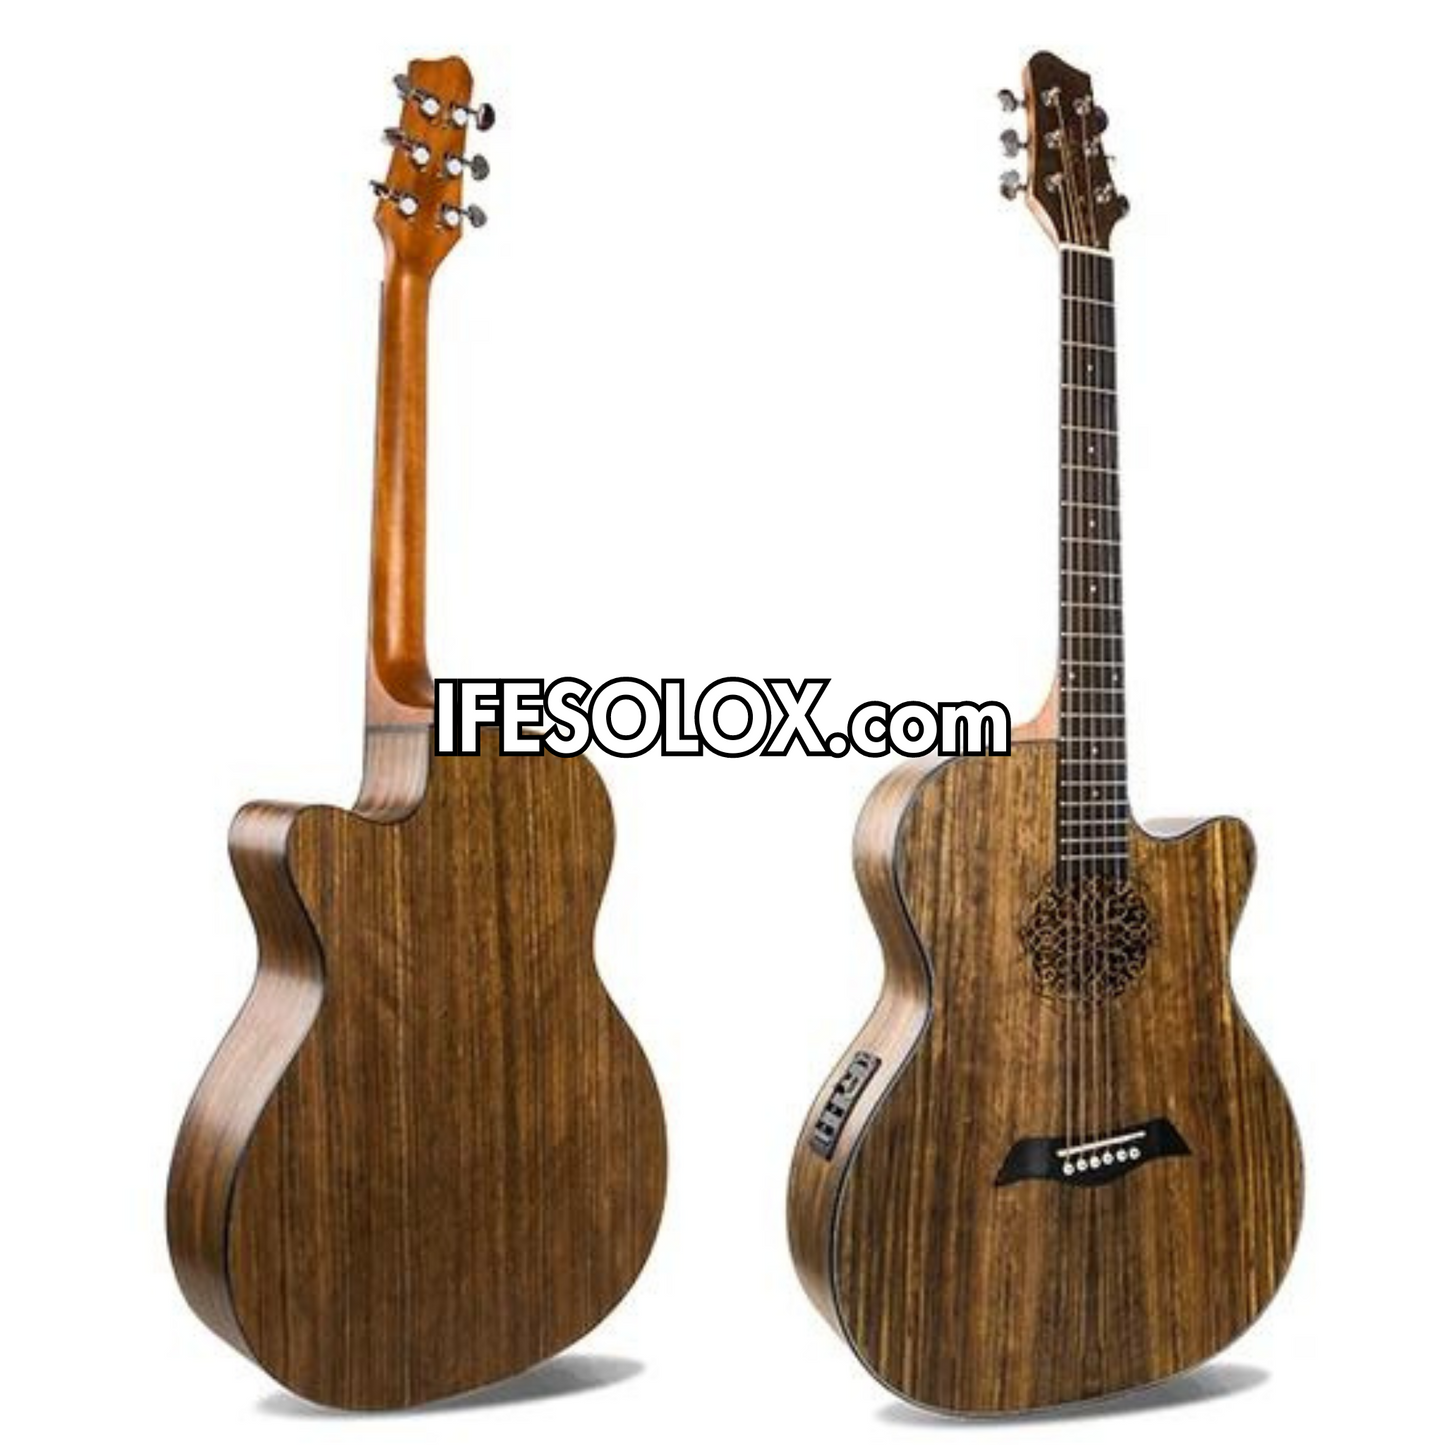 Smiger LG-09 40" Engraved Hole Single-cut Semi-Acoustic Guitar with Belt and Bag - Brand New